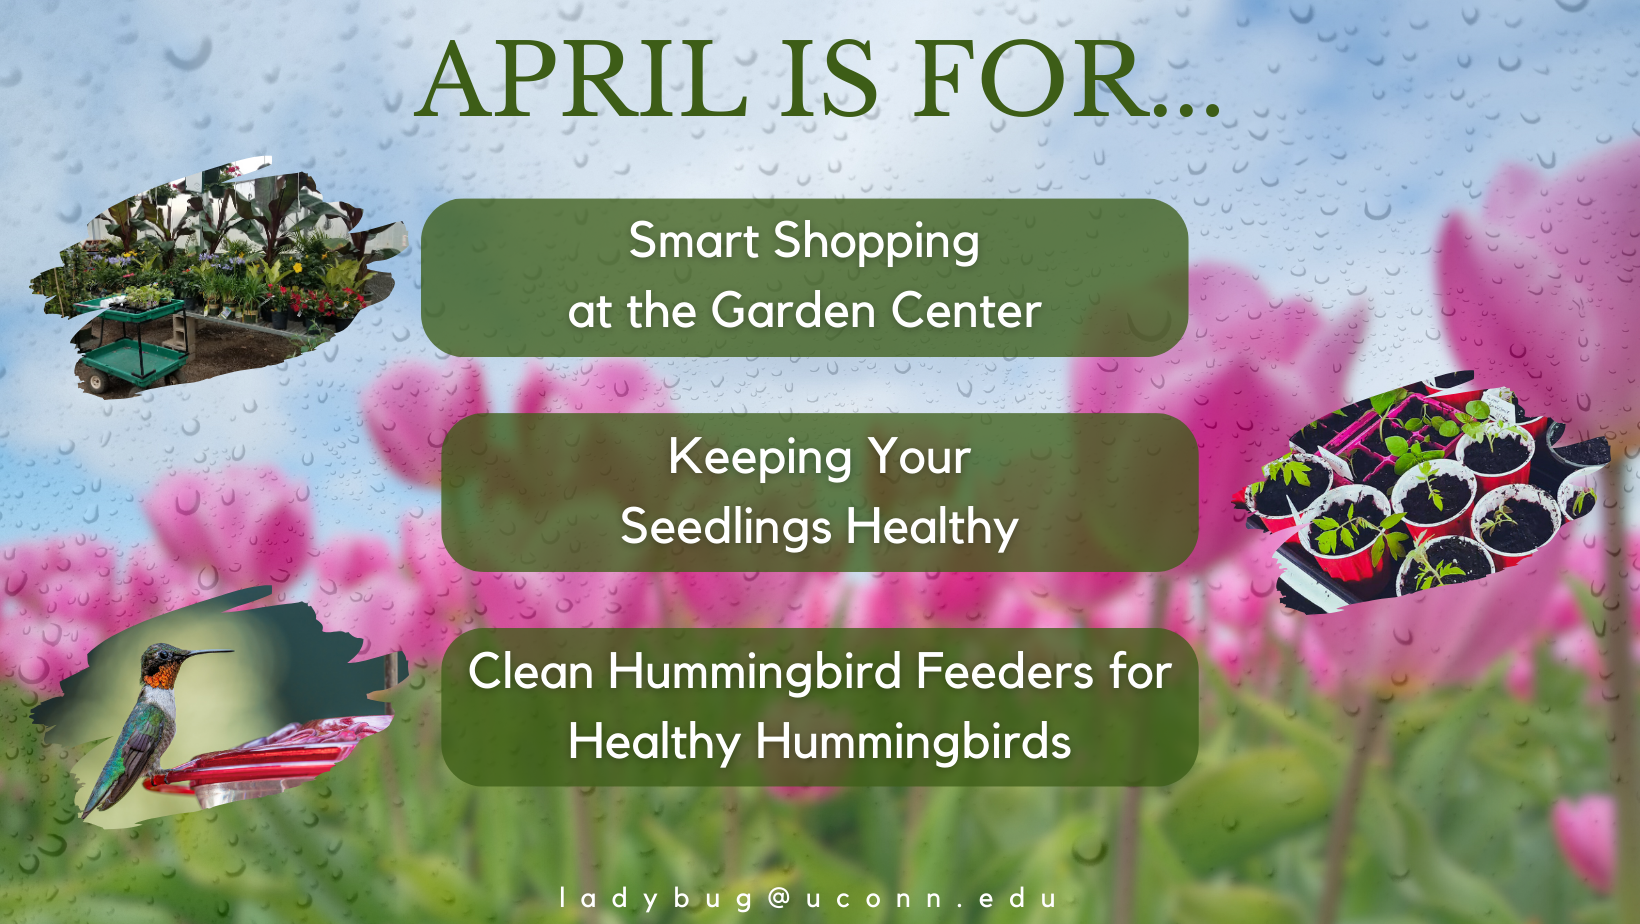 April is for smart shopping at the garden center, Keeping your seedlings healthy & Cleaning your hummingbird feeders!